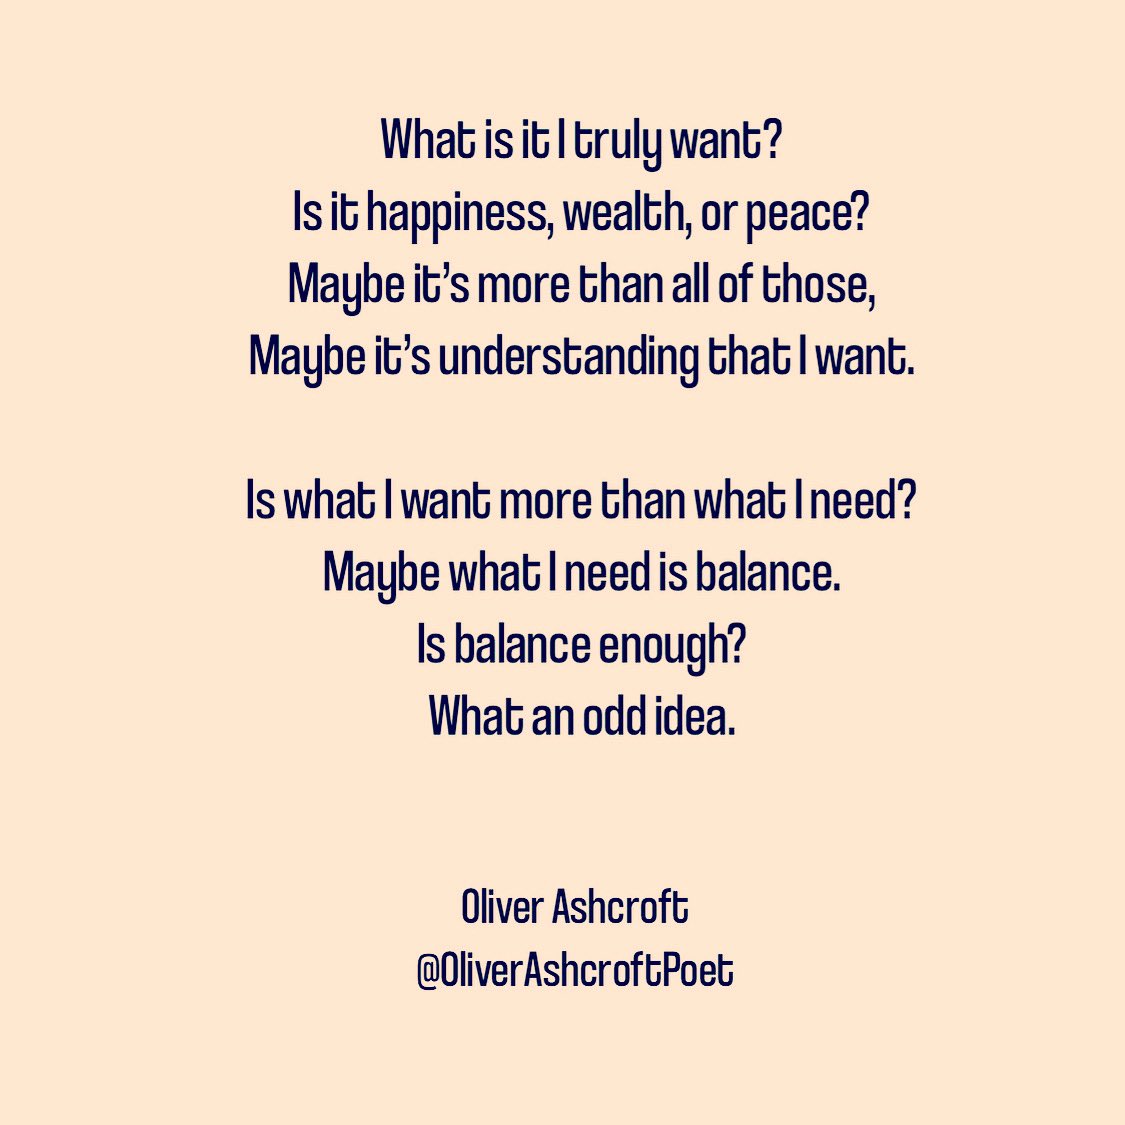 Maybe this doesn’t make sense but this came into my head in a single moment so I needed to write it down.

#moment #onemoment #poem #poetry #thoughtprovoking #thoughtoftheday #thought #want #need #whatdoyouwant #life #desire #wealth #peace #happiness